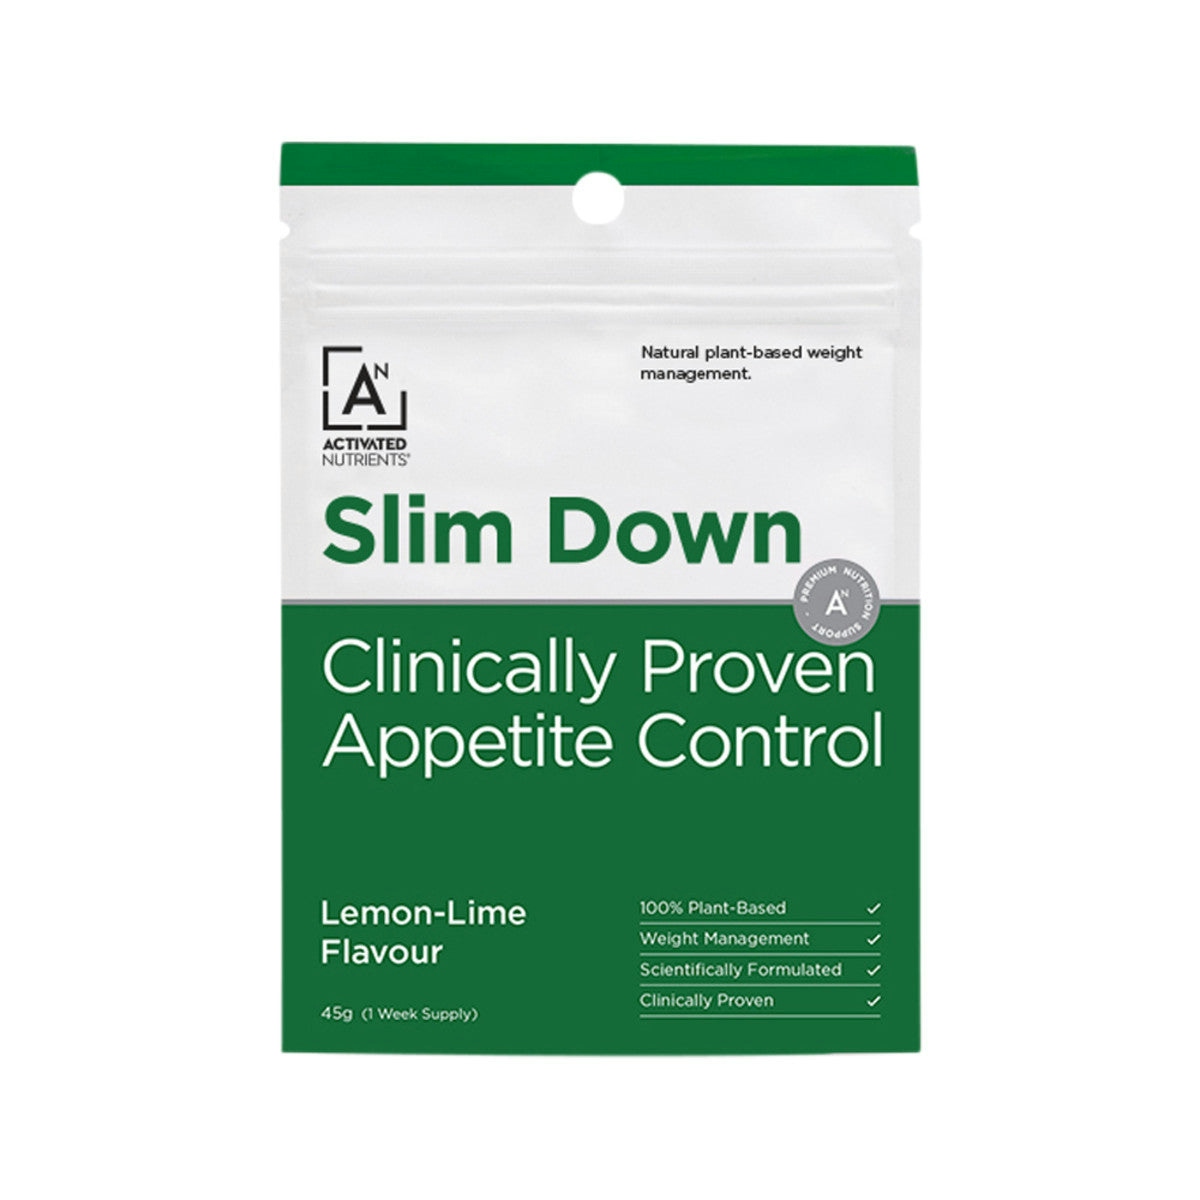 image of Activated Nutrients Slim Down (Clinically Proven Appetite Control) Lemon-Lime 45g on white background 